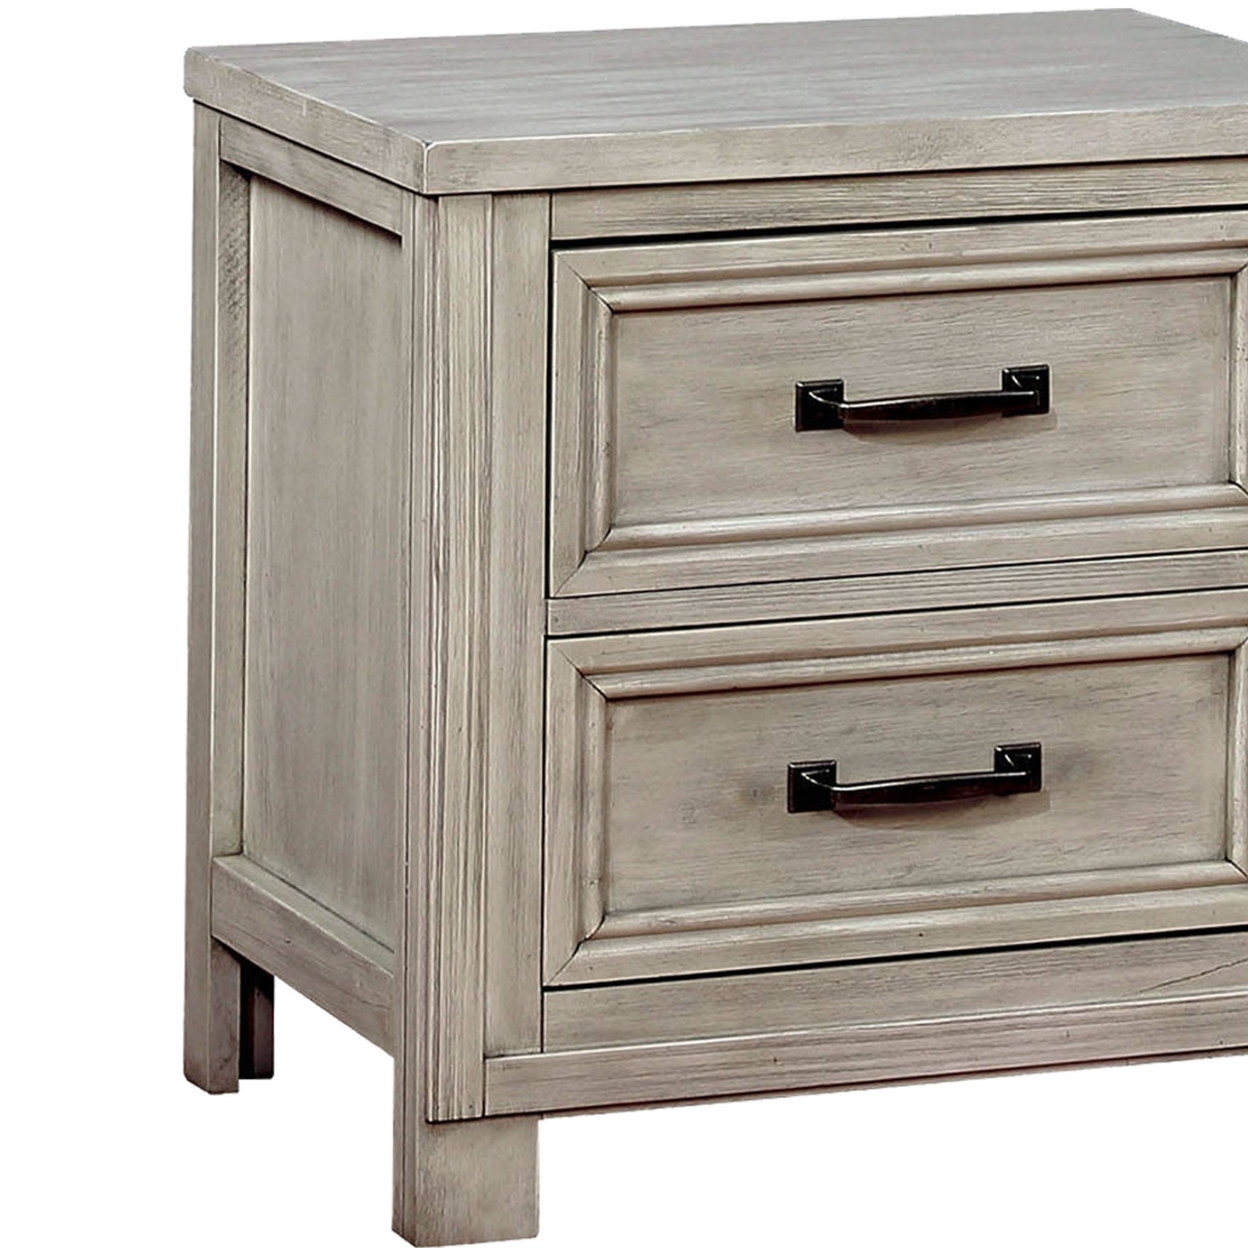 Transitional 2 Drawer Wooden Nightstand With Molded Trim,Antique White- Saltoro Sherpi